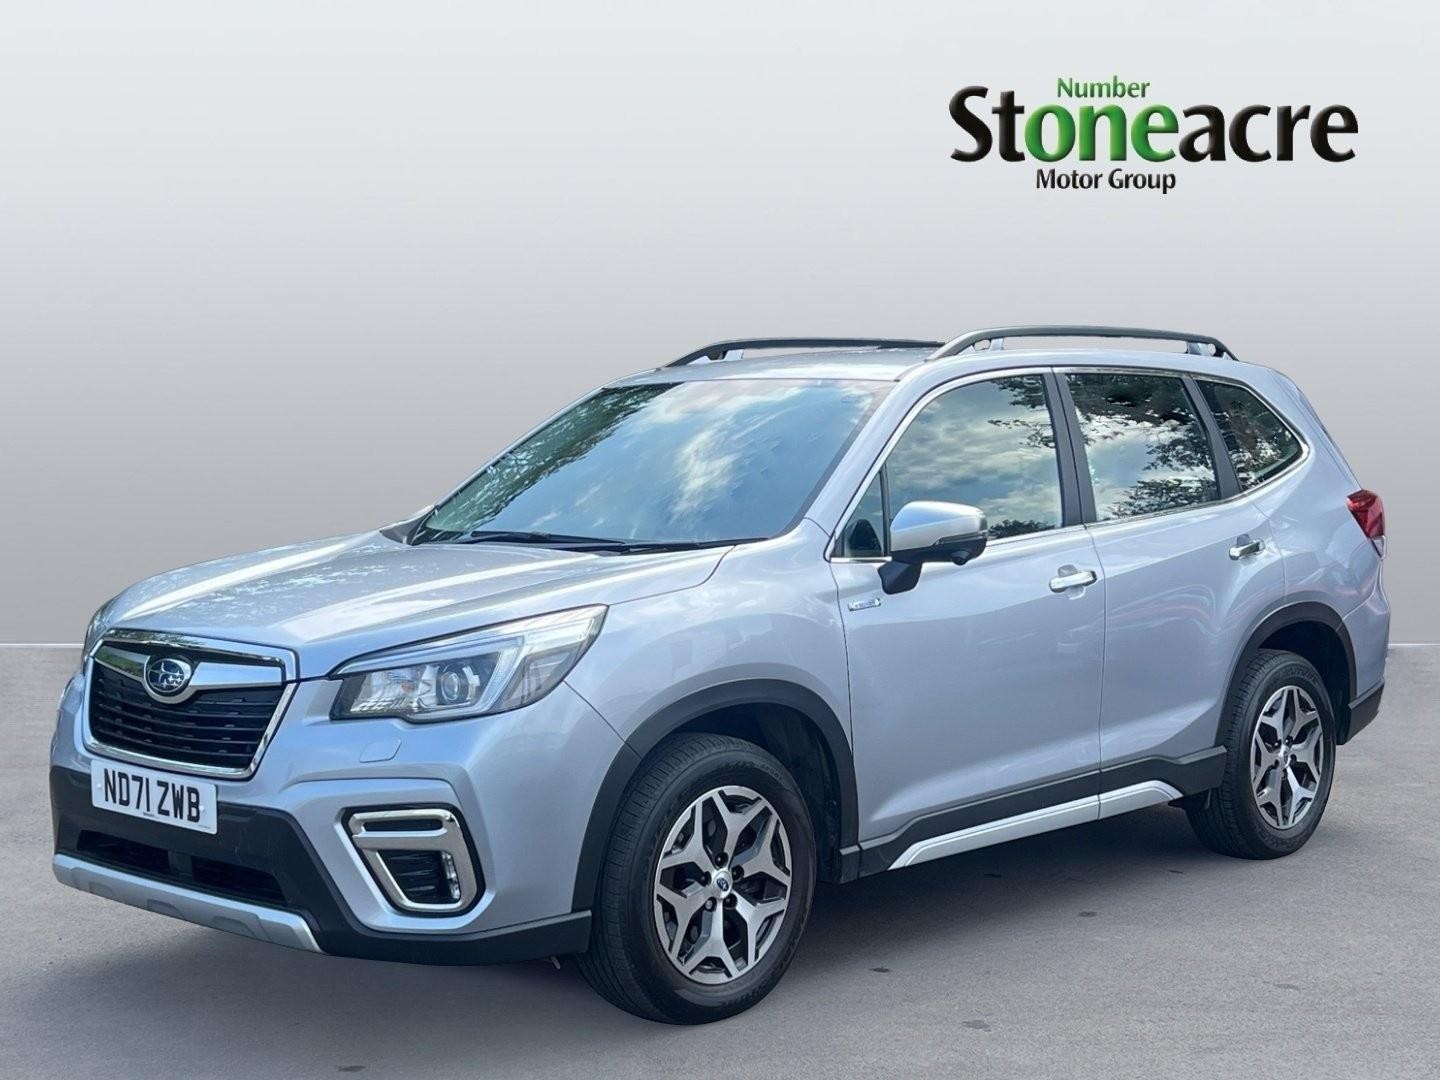 Subaru Forester 2.0 e-Boxer XE SUV 5dr Petrol Hybrid Lineartronic 4WD Euro 6 (s/s) (150 ps) (ND71ZWB) image 5